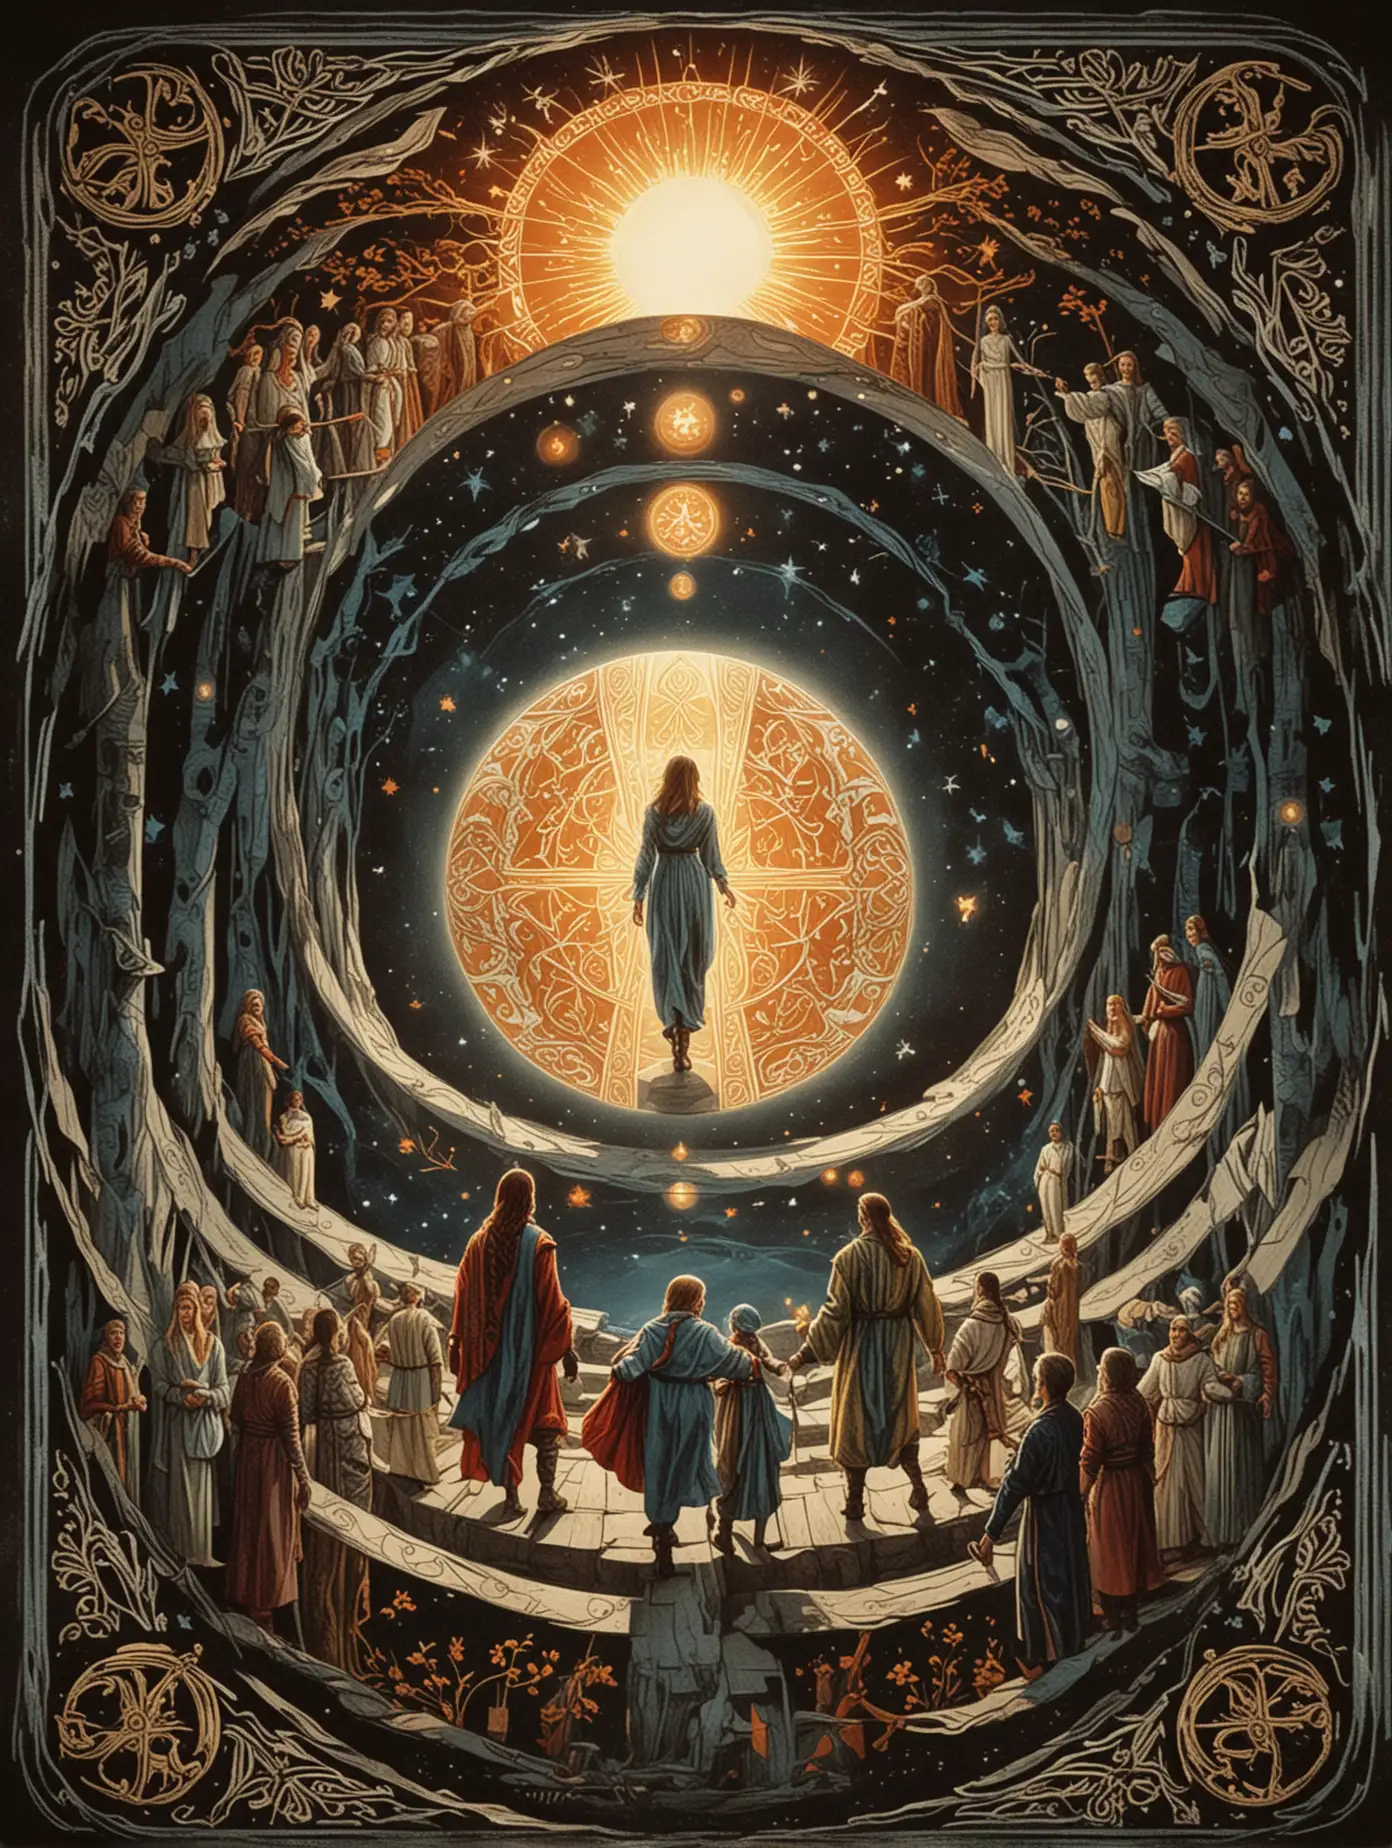 Slavic-Style-Tarot-Card-with-Symmetrical-Figures-Approaching-Glowing-Sphere